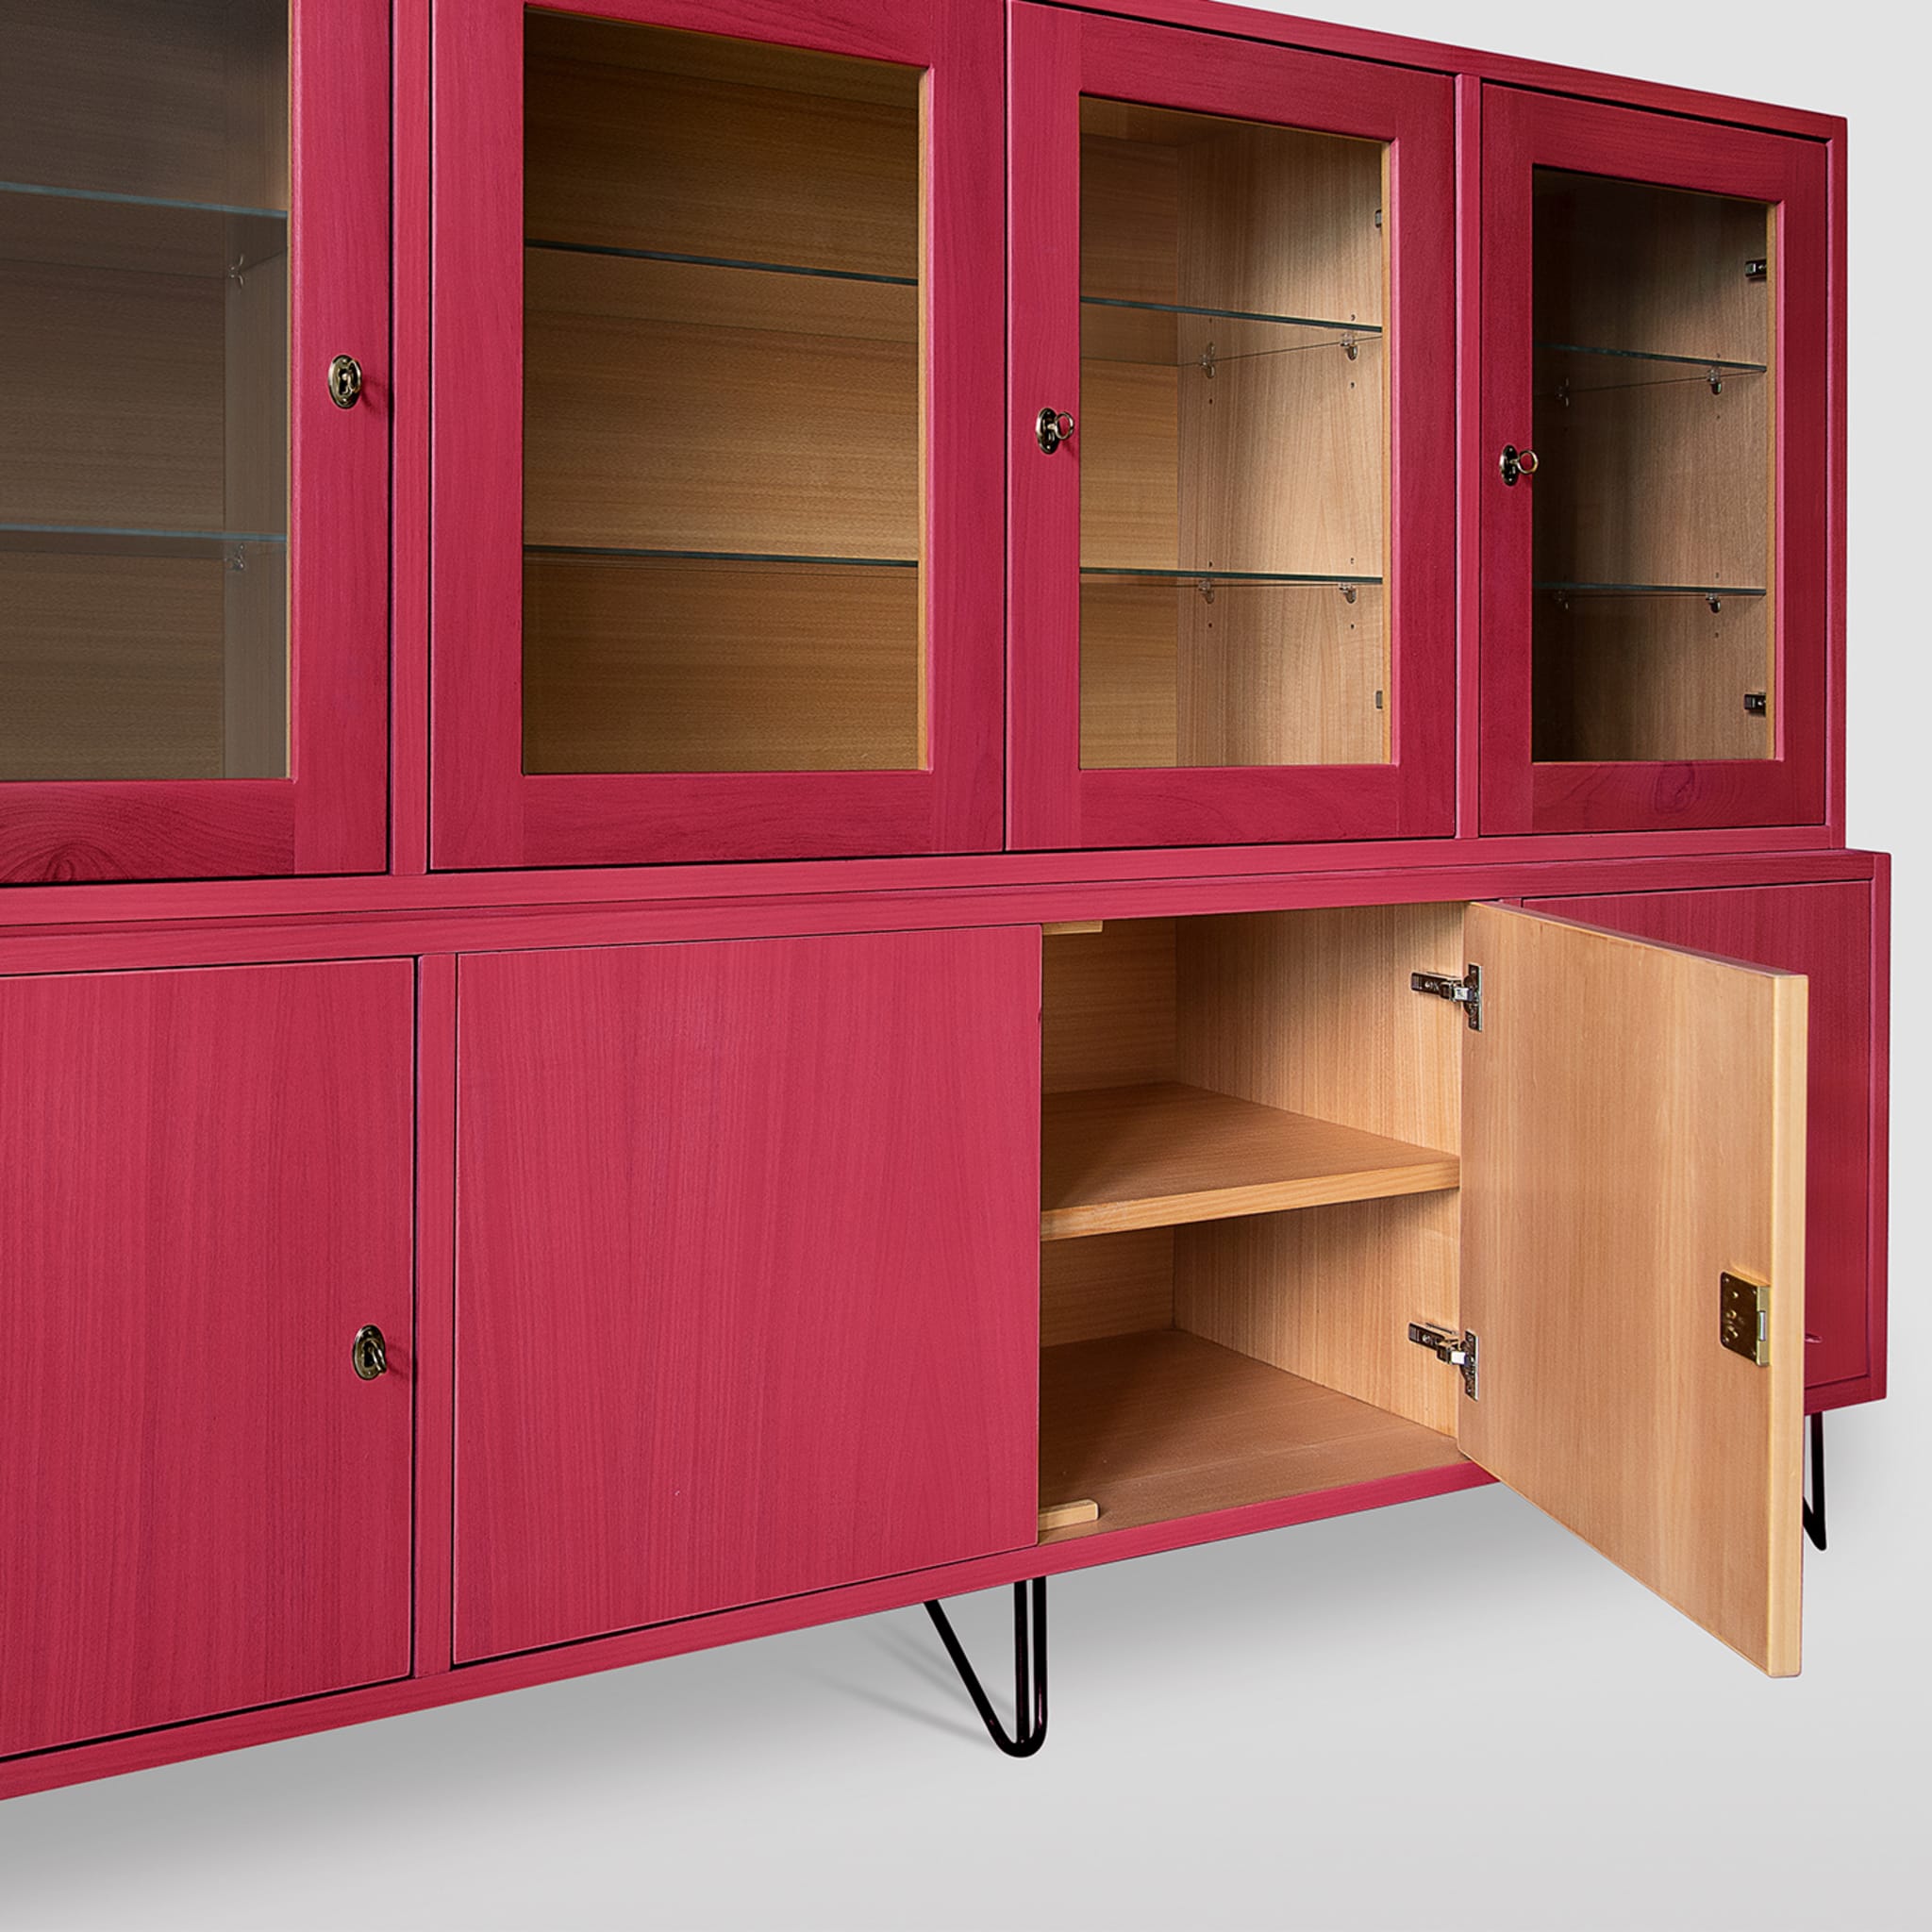 Eroica Red Cabinet by Eugenio Gambella - Alternative view 1